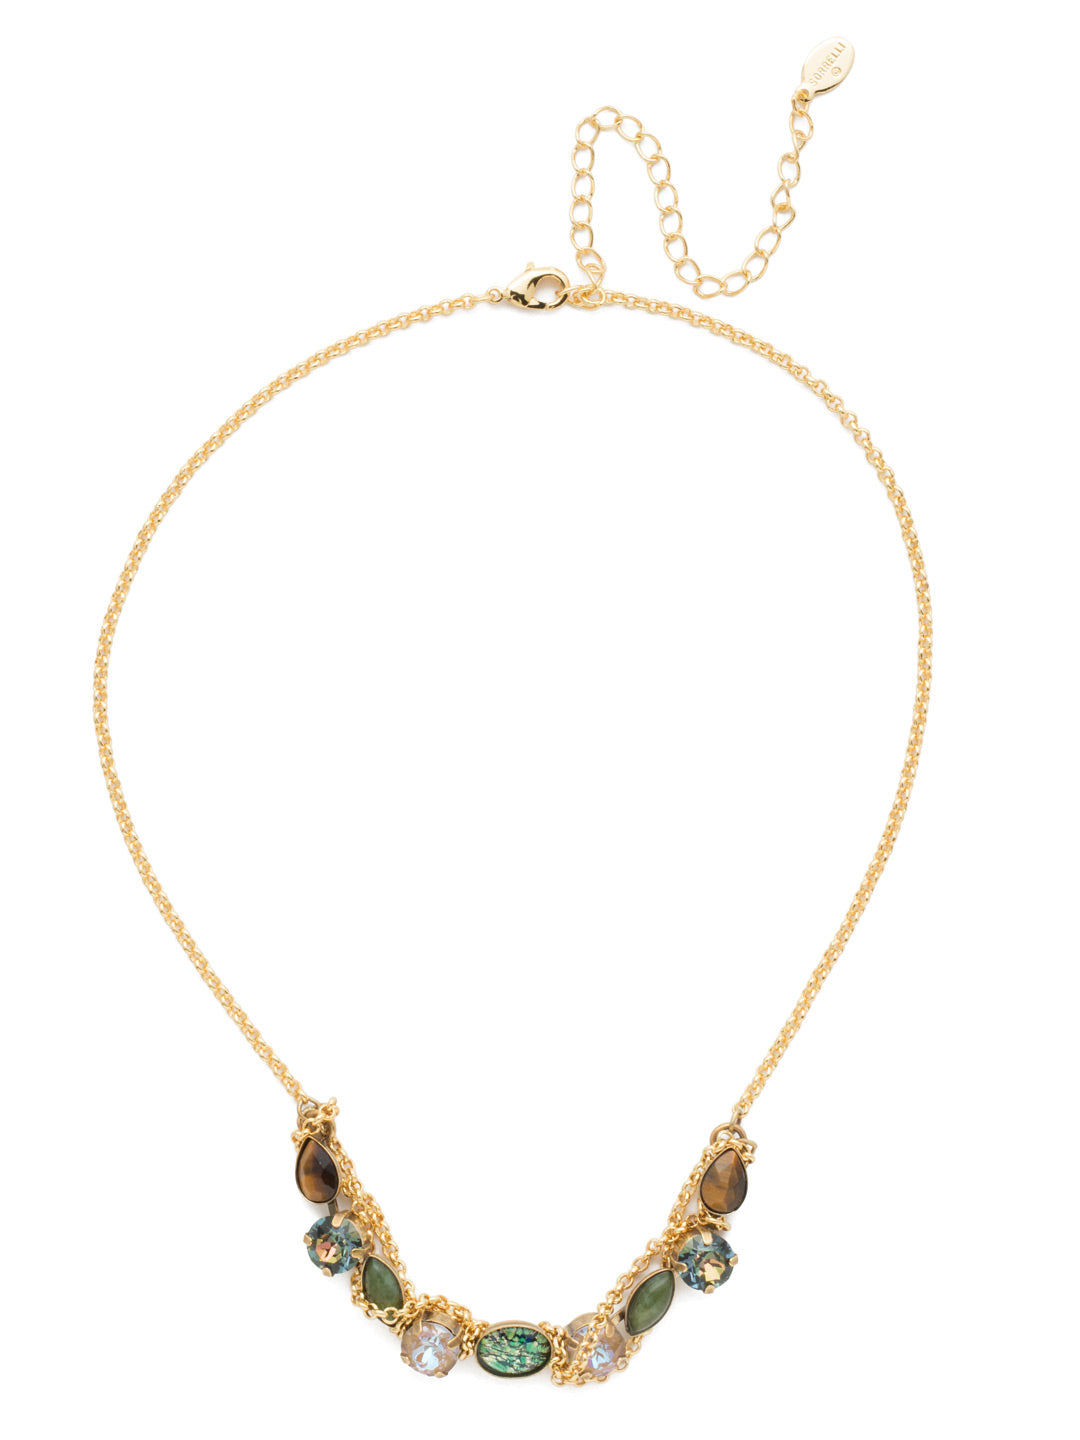 Melrose Tennis Necklace - NET16MXCSM - <p>Our Melrose Tennis Necklace intertwines the metal chain trend with our signature sparkling Sorrelli crystals in an assortment of shapes and varying levels of shine. From Sorrelli's Cashmere collection in our Mixed Metal finish.</p>